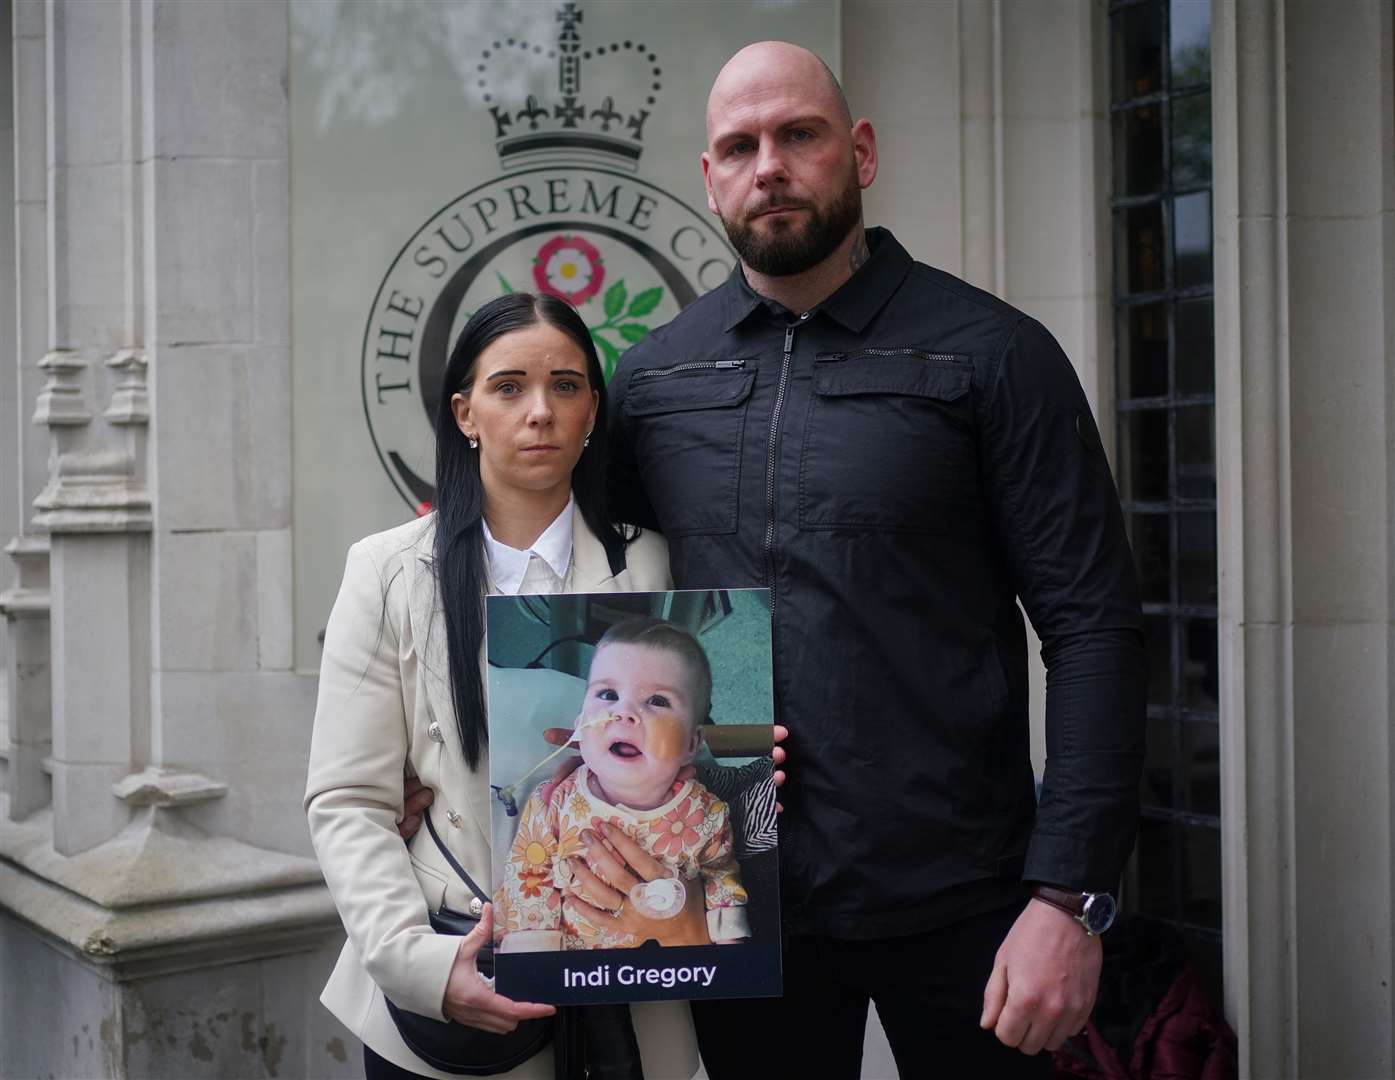 Dean Gregory and Claire Staniforth hold a photo of Indi Gregory (Yui Mok/PA)